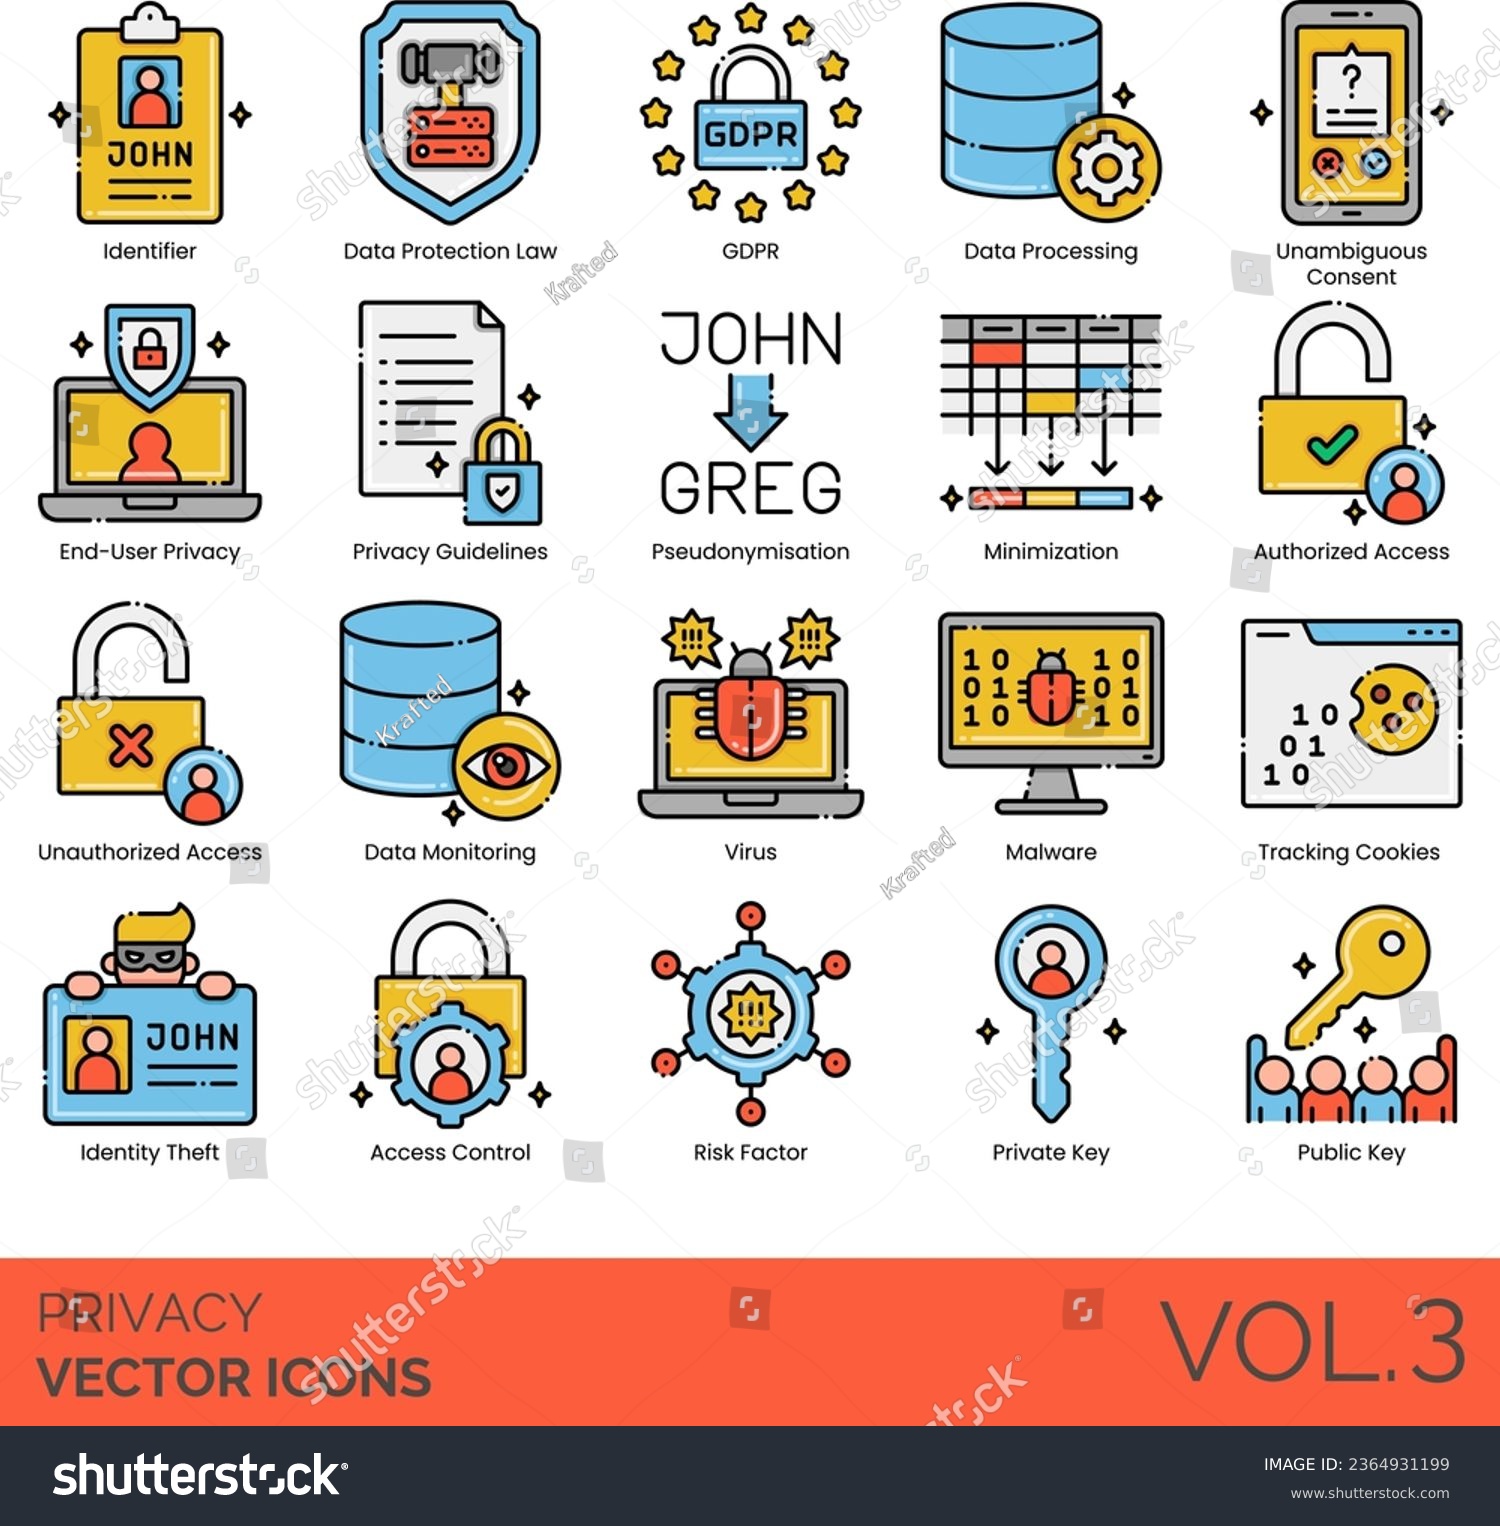 SVG of Privacy Icons including Security, Smart Doorbell, Smart Home Security, Social Media Presence, Support, Surveillance Camera, Targeted Marketing, Tracking Cookies, Unambiguous Consent svg